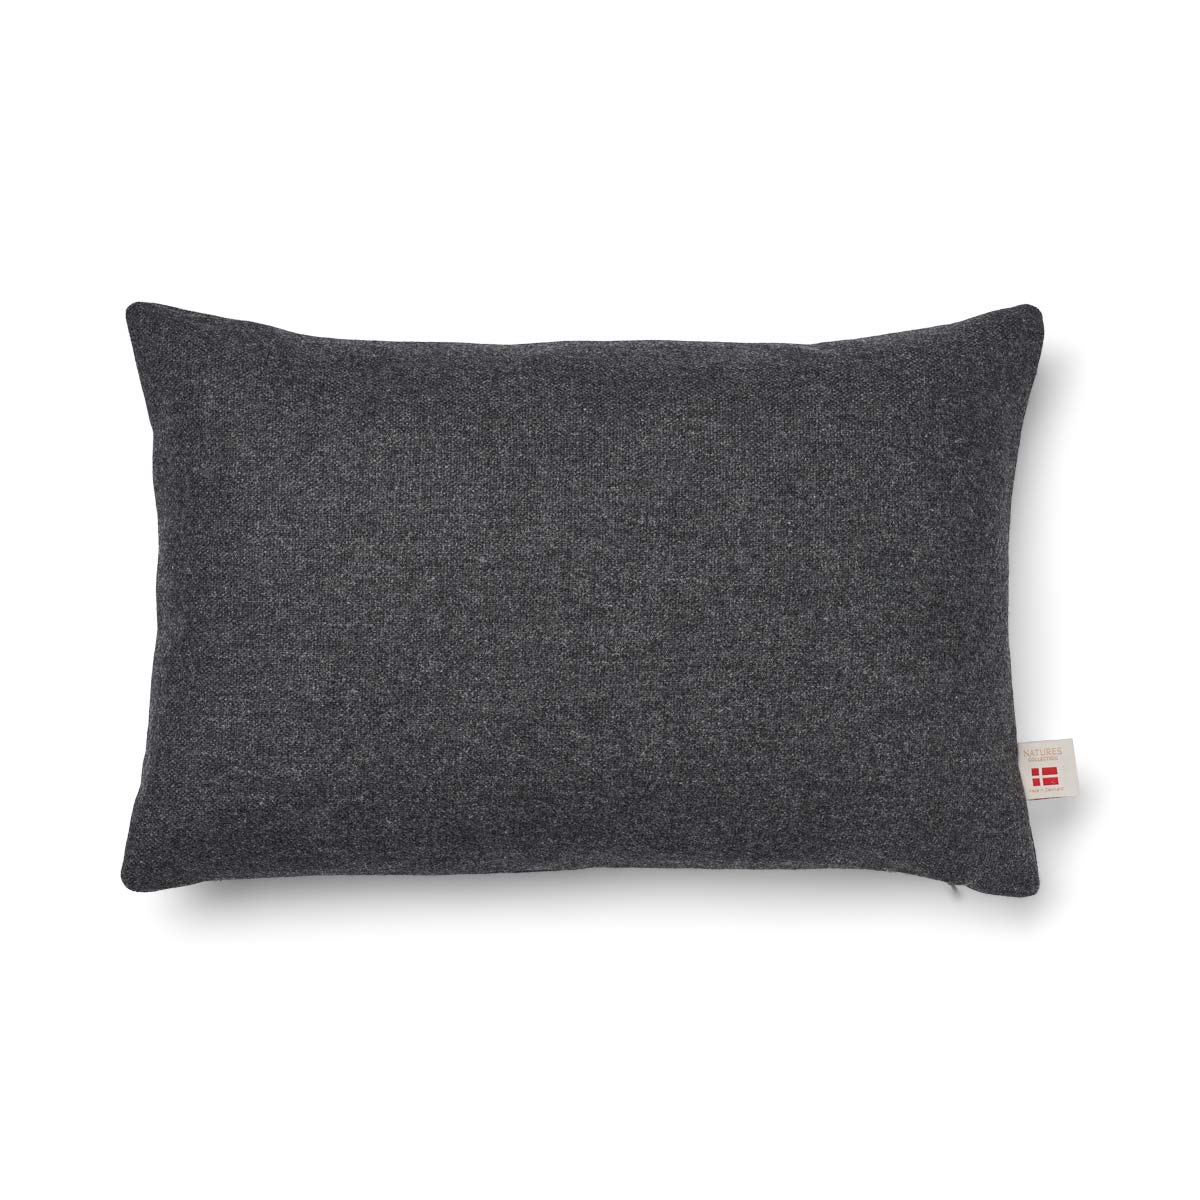 Classic Collection, Doublesided Cushion 100 % wool. Size: 34x52 cm.